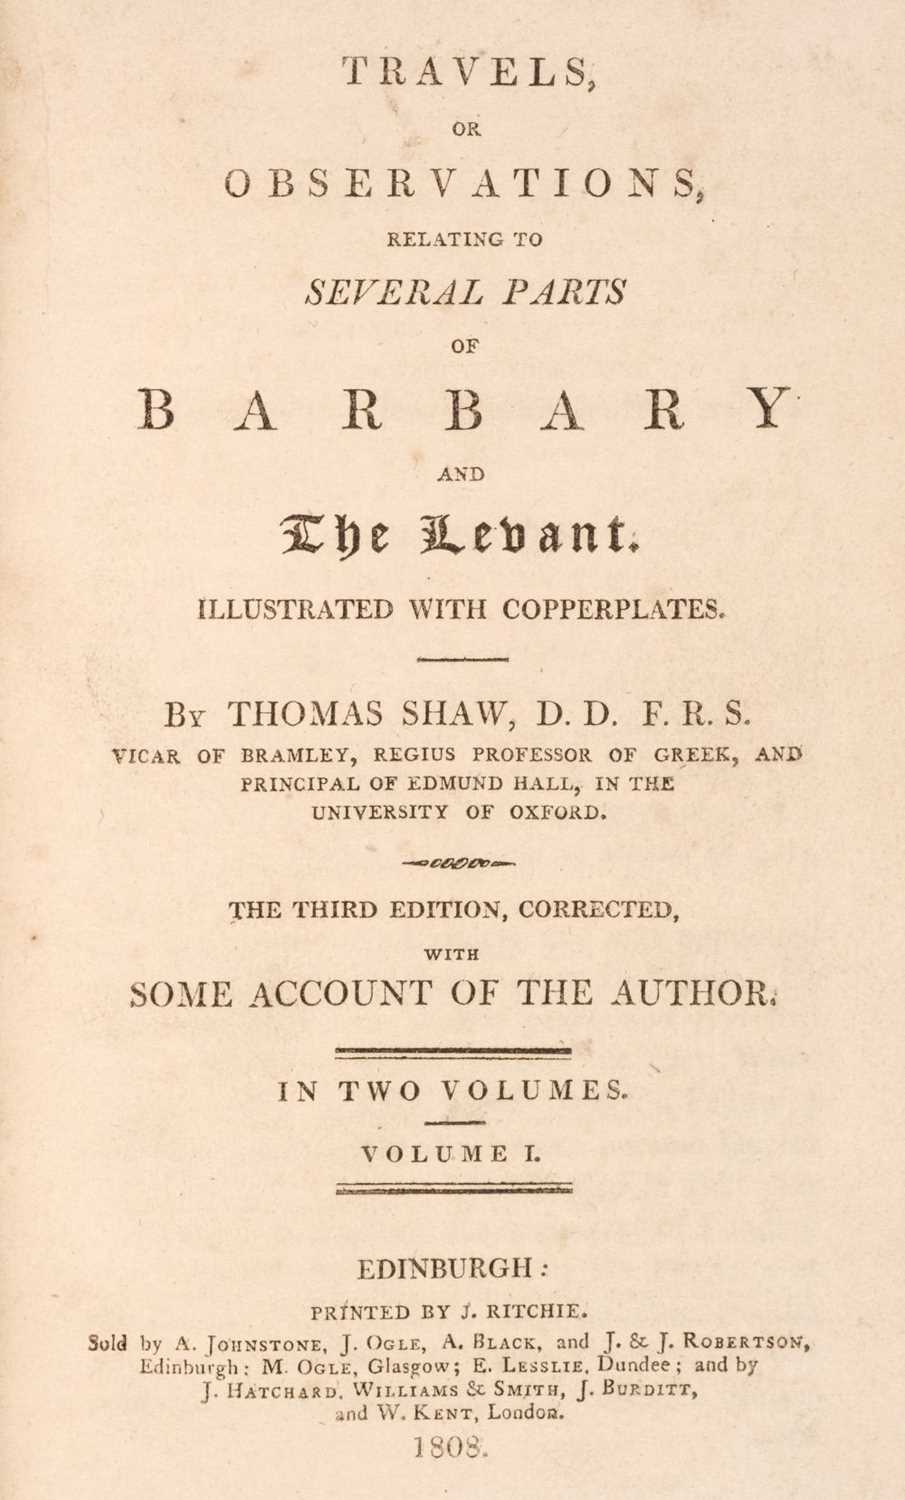 Lot 34 - Shaw (Thomas). Travels, or Observations, relating ... Barbary and the Levant, 2 vols., 3rd ed., 1808